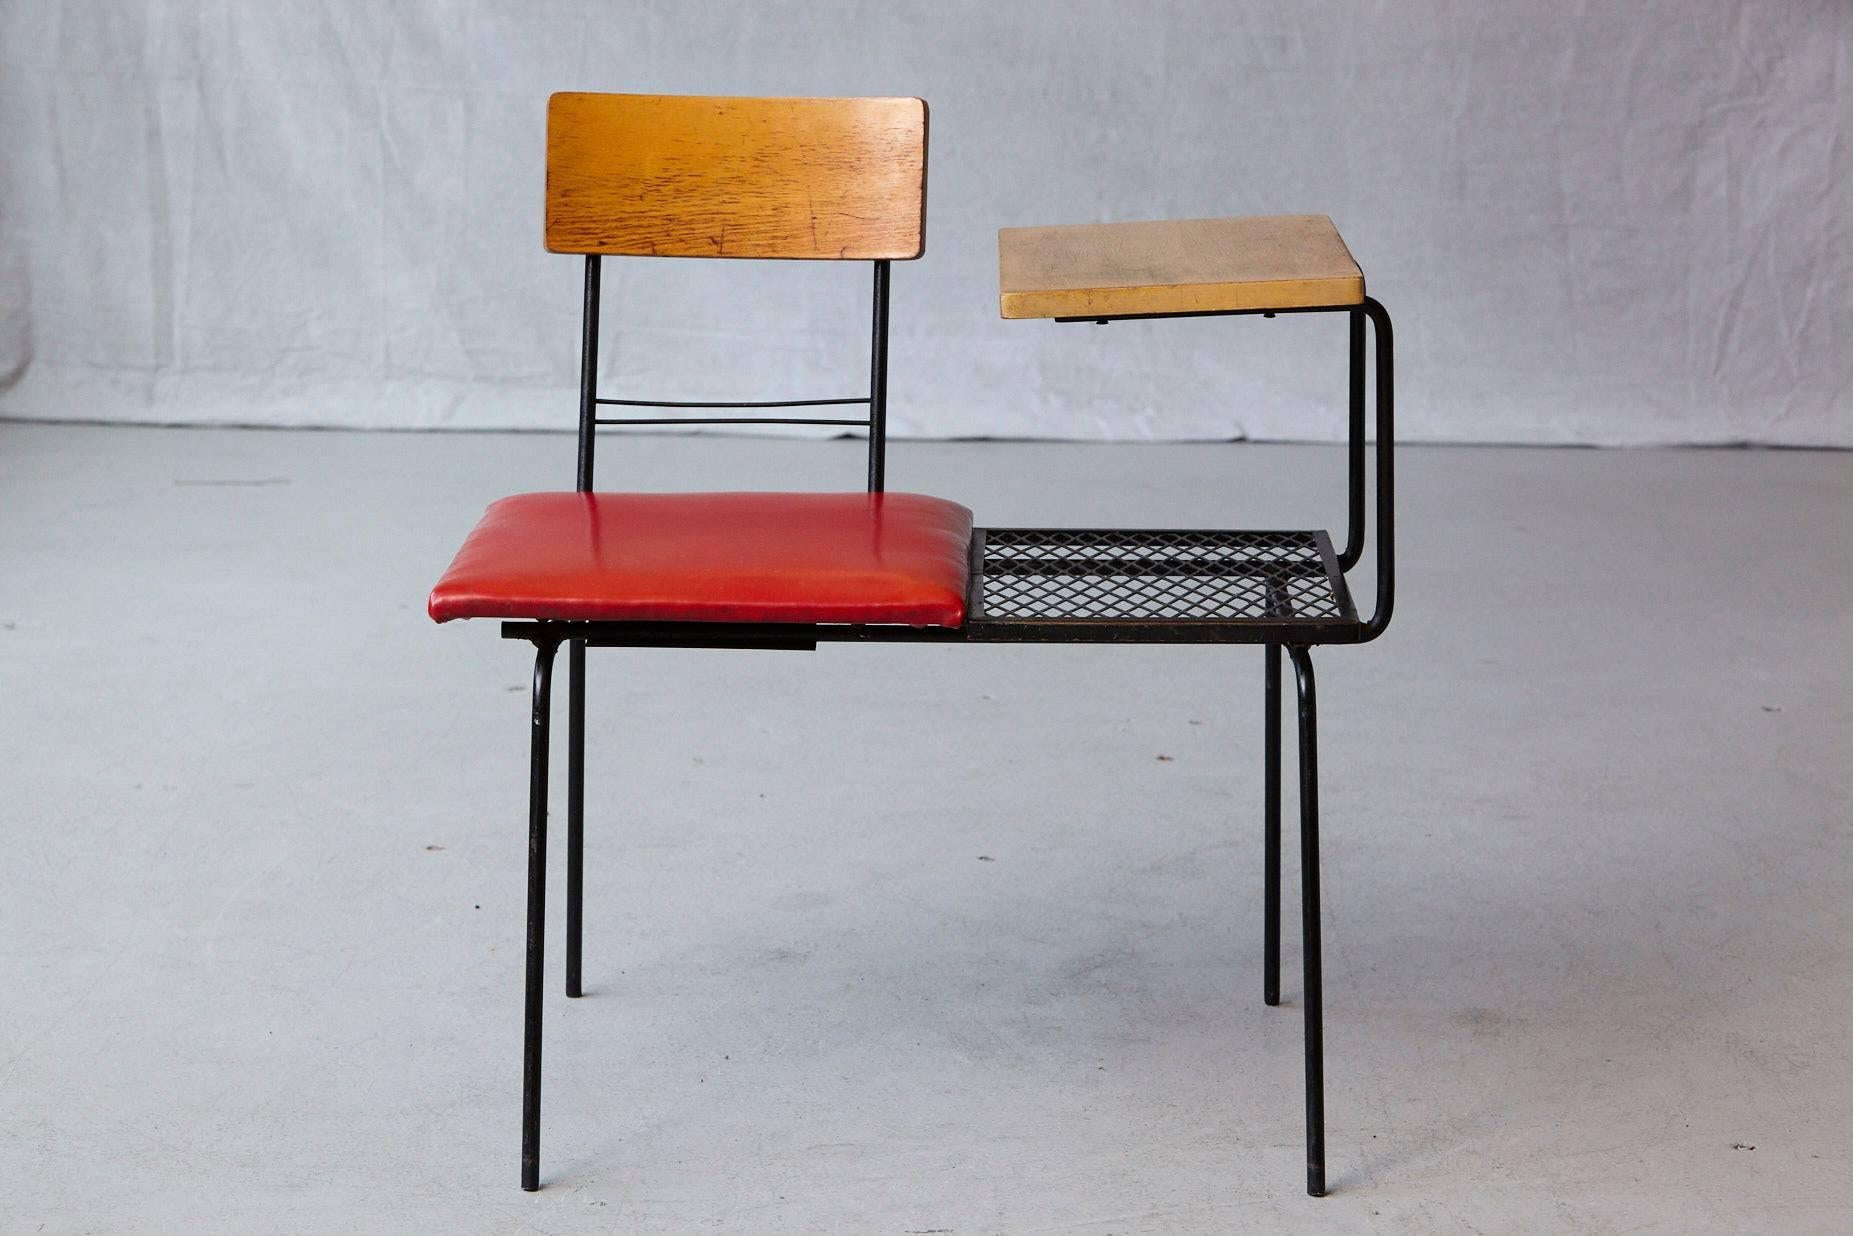 Midcentury black metal wire telephone table with integrated bench or seat covered in red Naugahyde. The seat and back unit can be positioned in a 180 degree direction to fit for left or right hand people.
Measures: Seat height 16.5 inches.